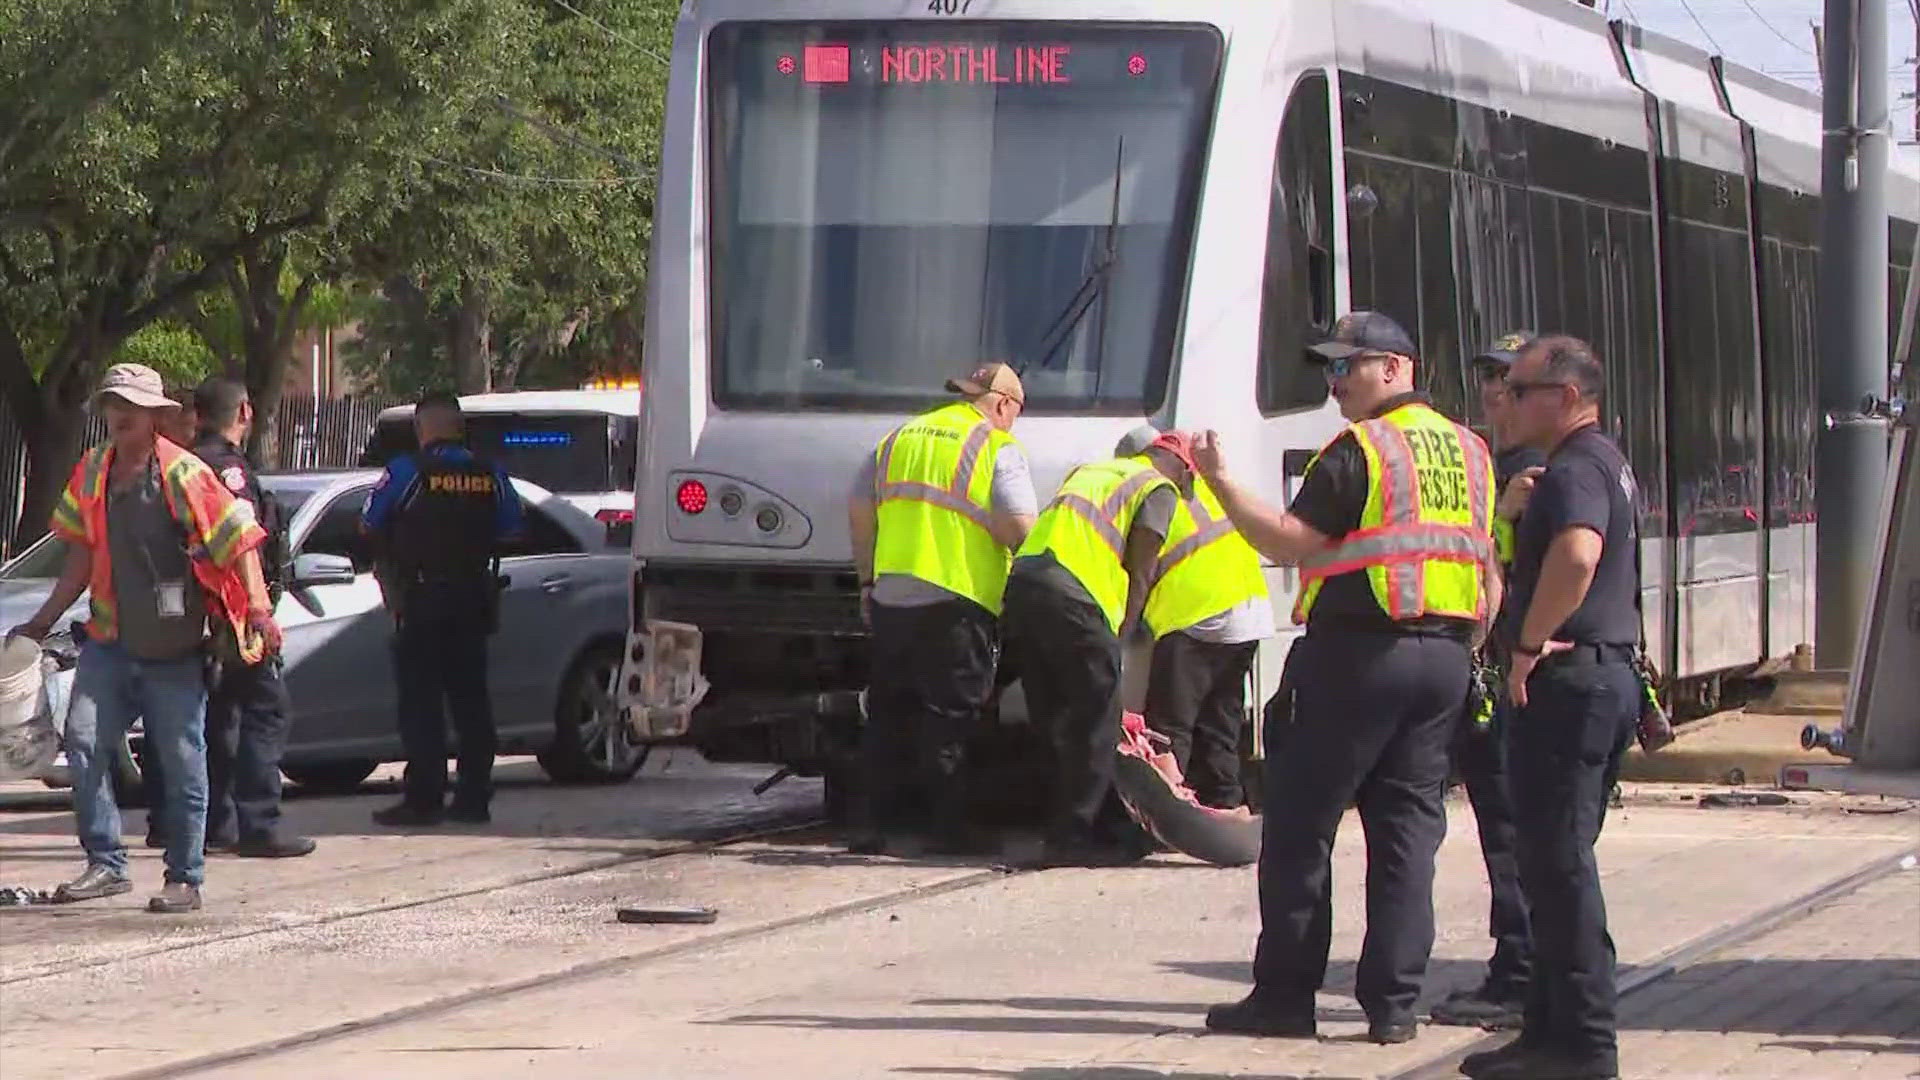 Officials said five people were hospitalized after the crash along the Red Line at Greenbriar and OST.